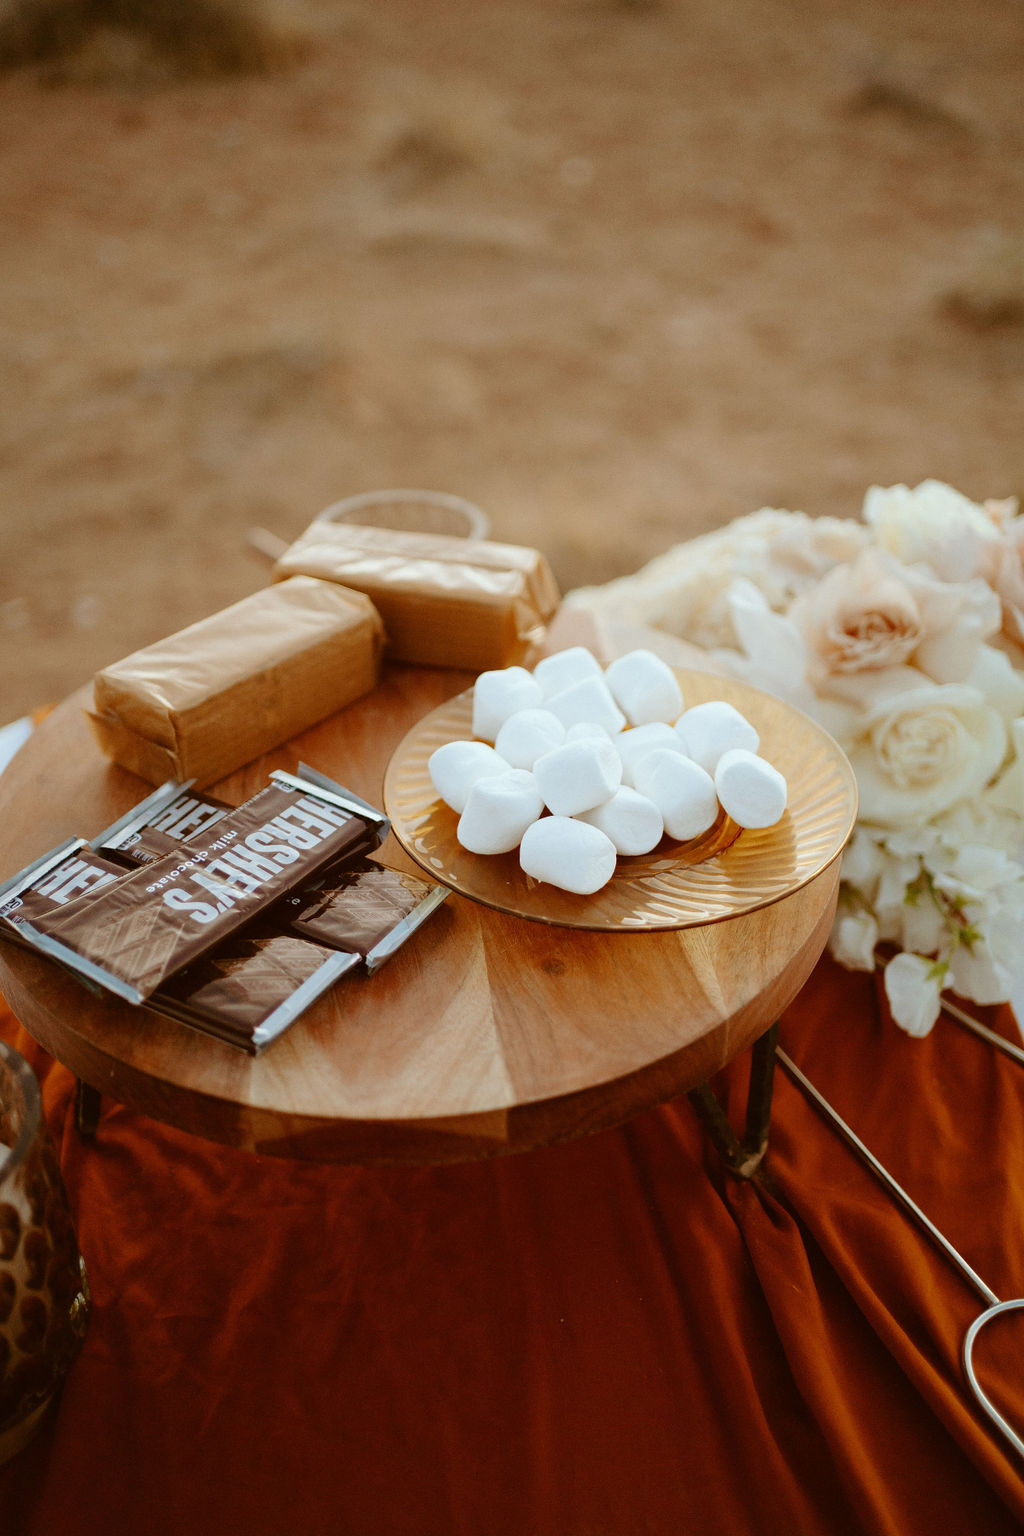 Table set up with Hershey's chocolate bars, graham crackers, and marshmallow's for s'mores.